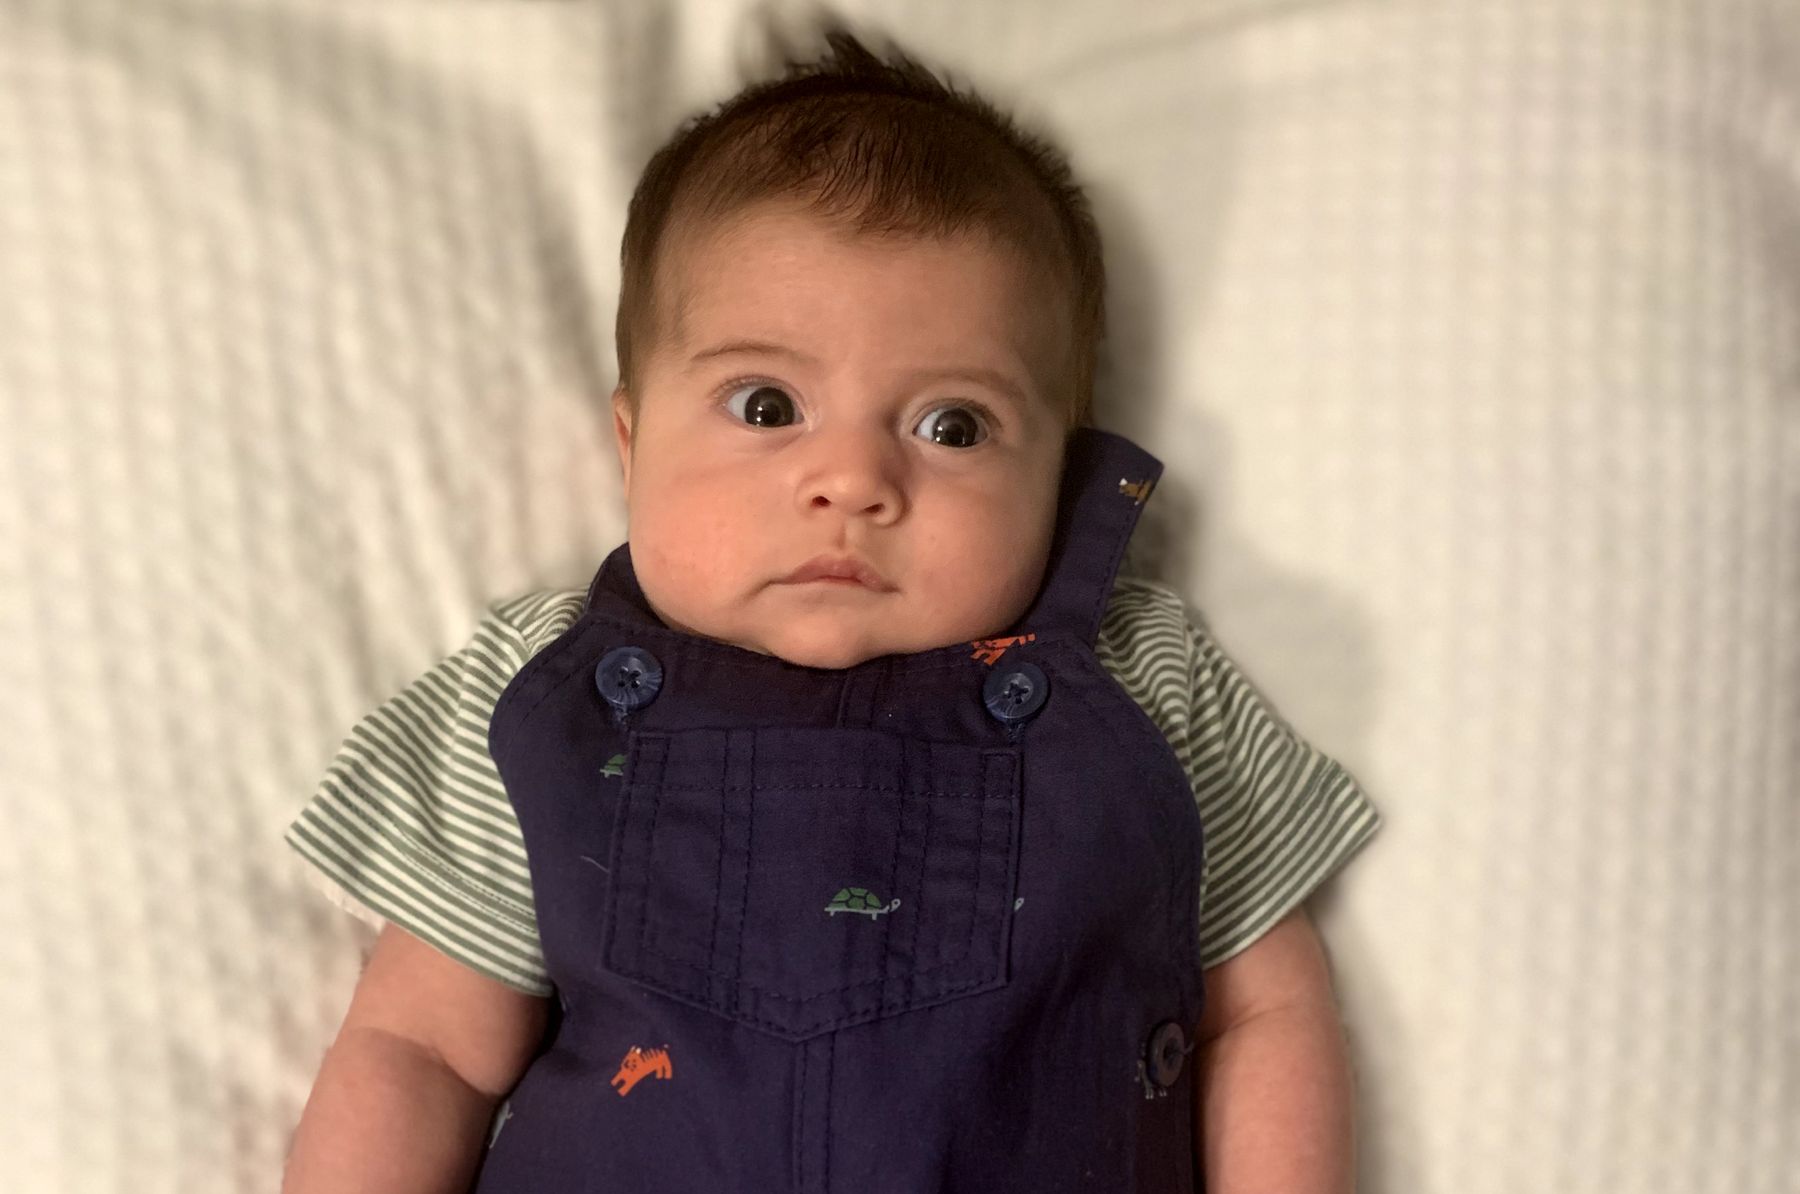 Infant wearing overalls lays on a bed and looks up with wide eyes.